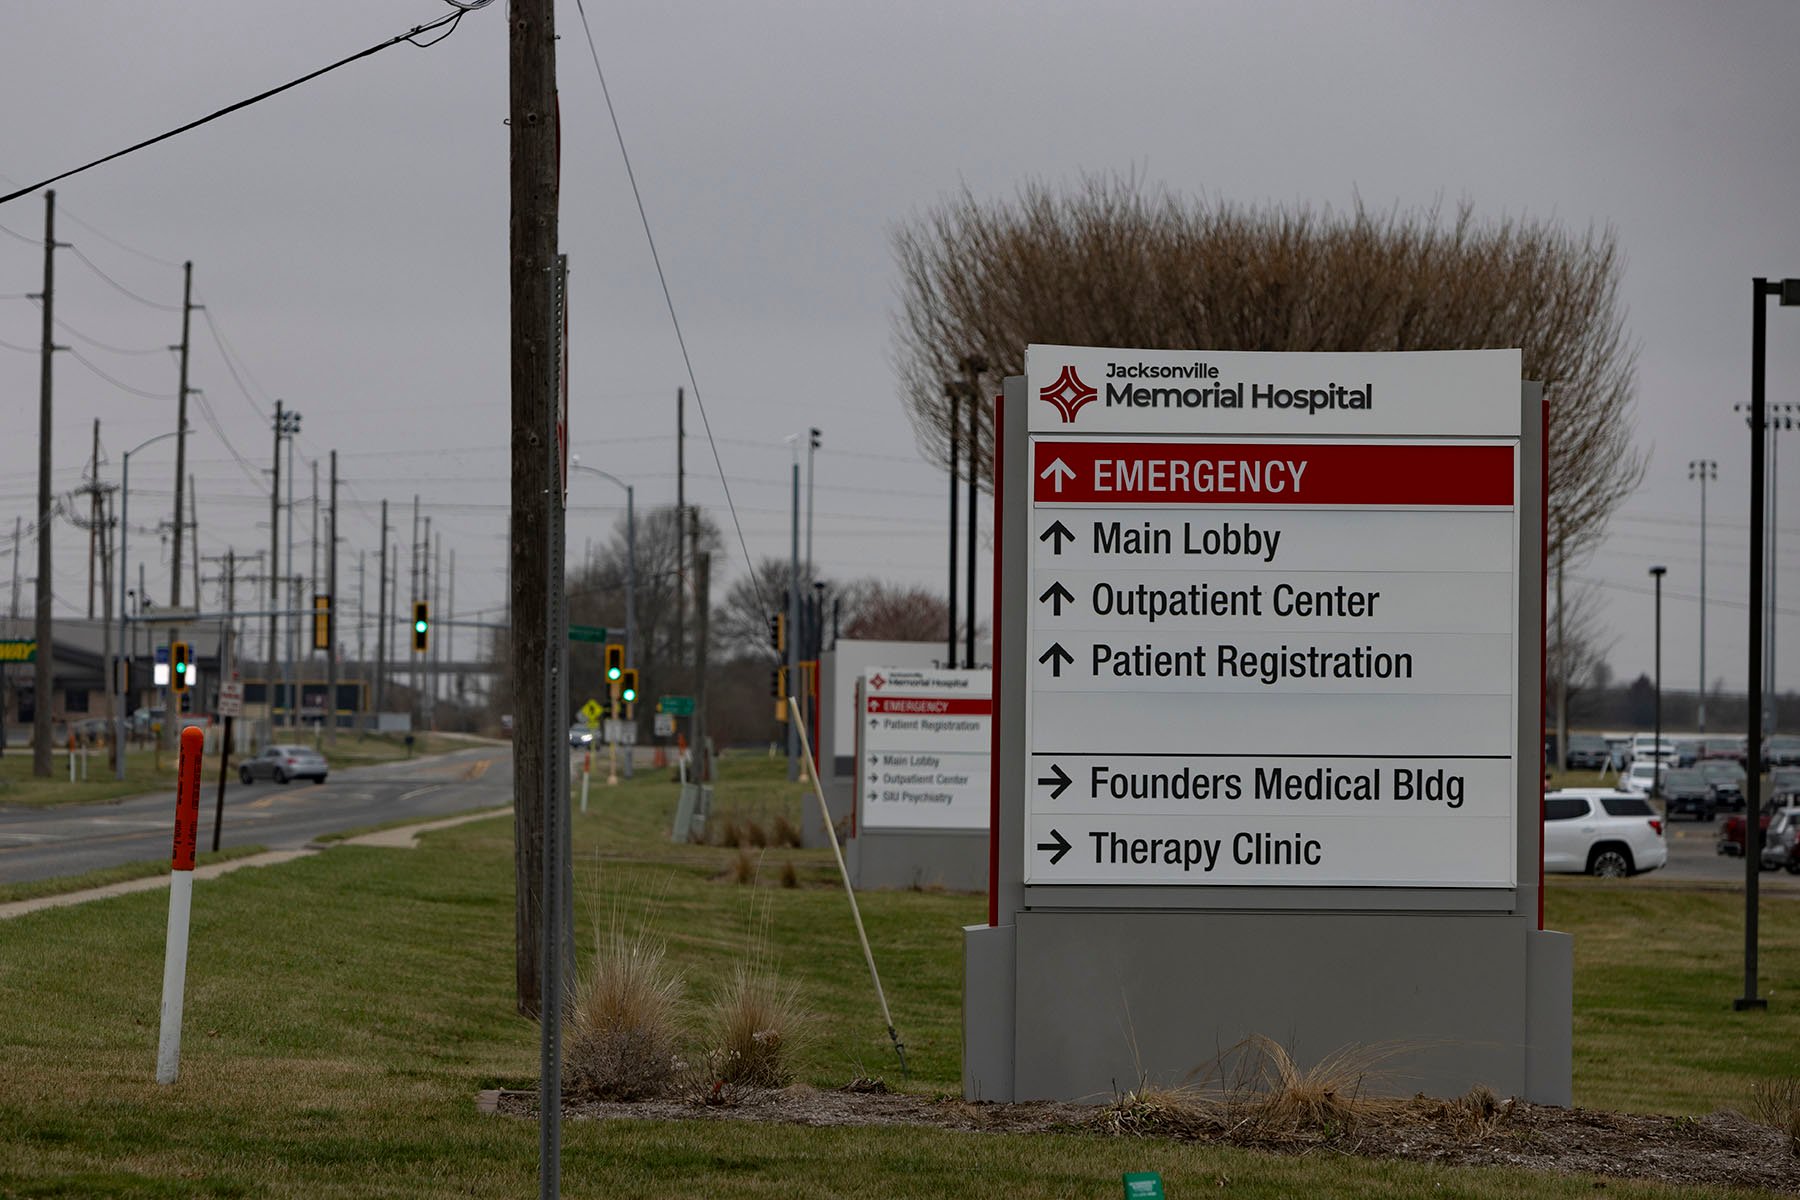 Signs for Jackson Memorial Hospital are seen in Jacksonville, Illinois.